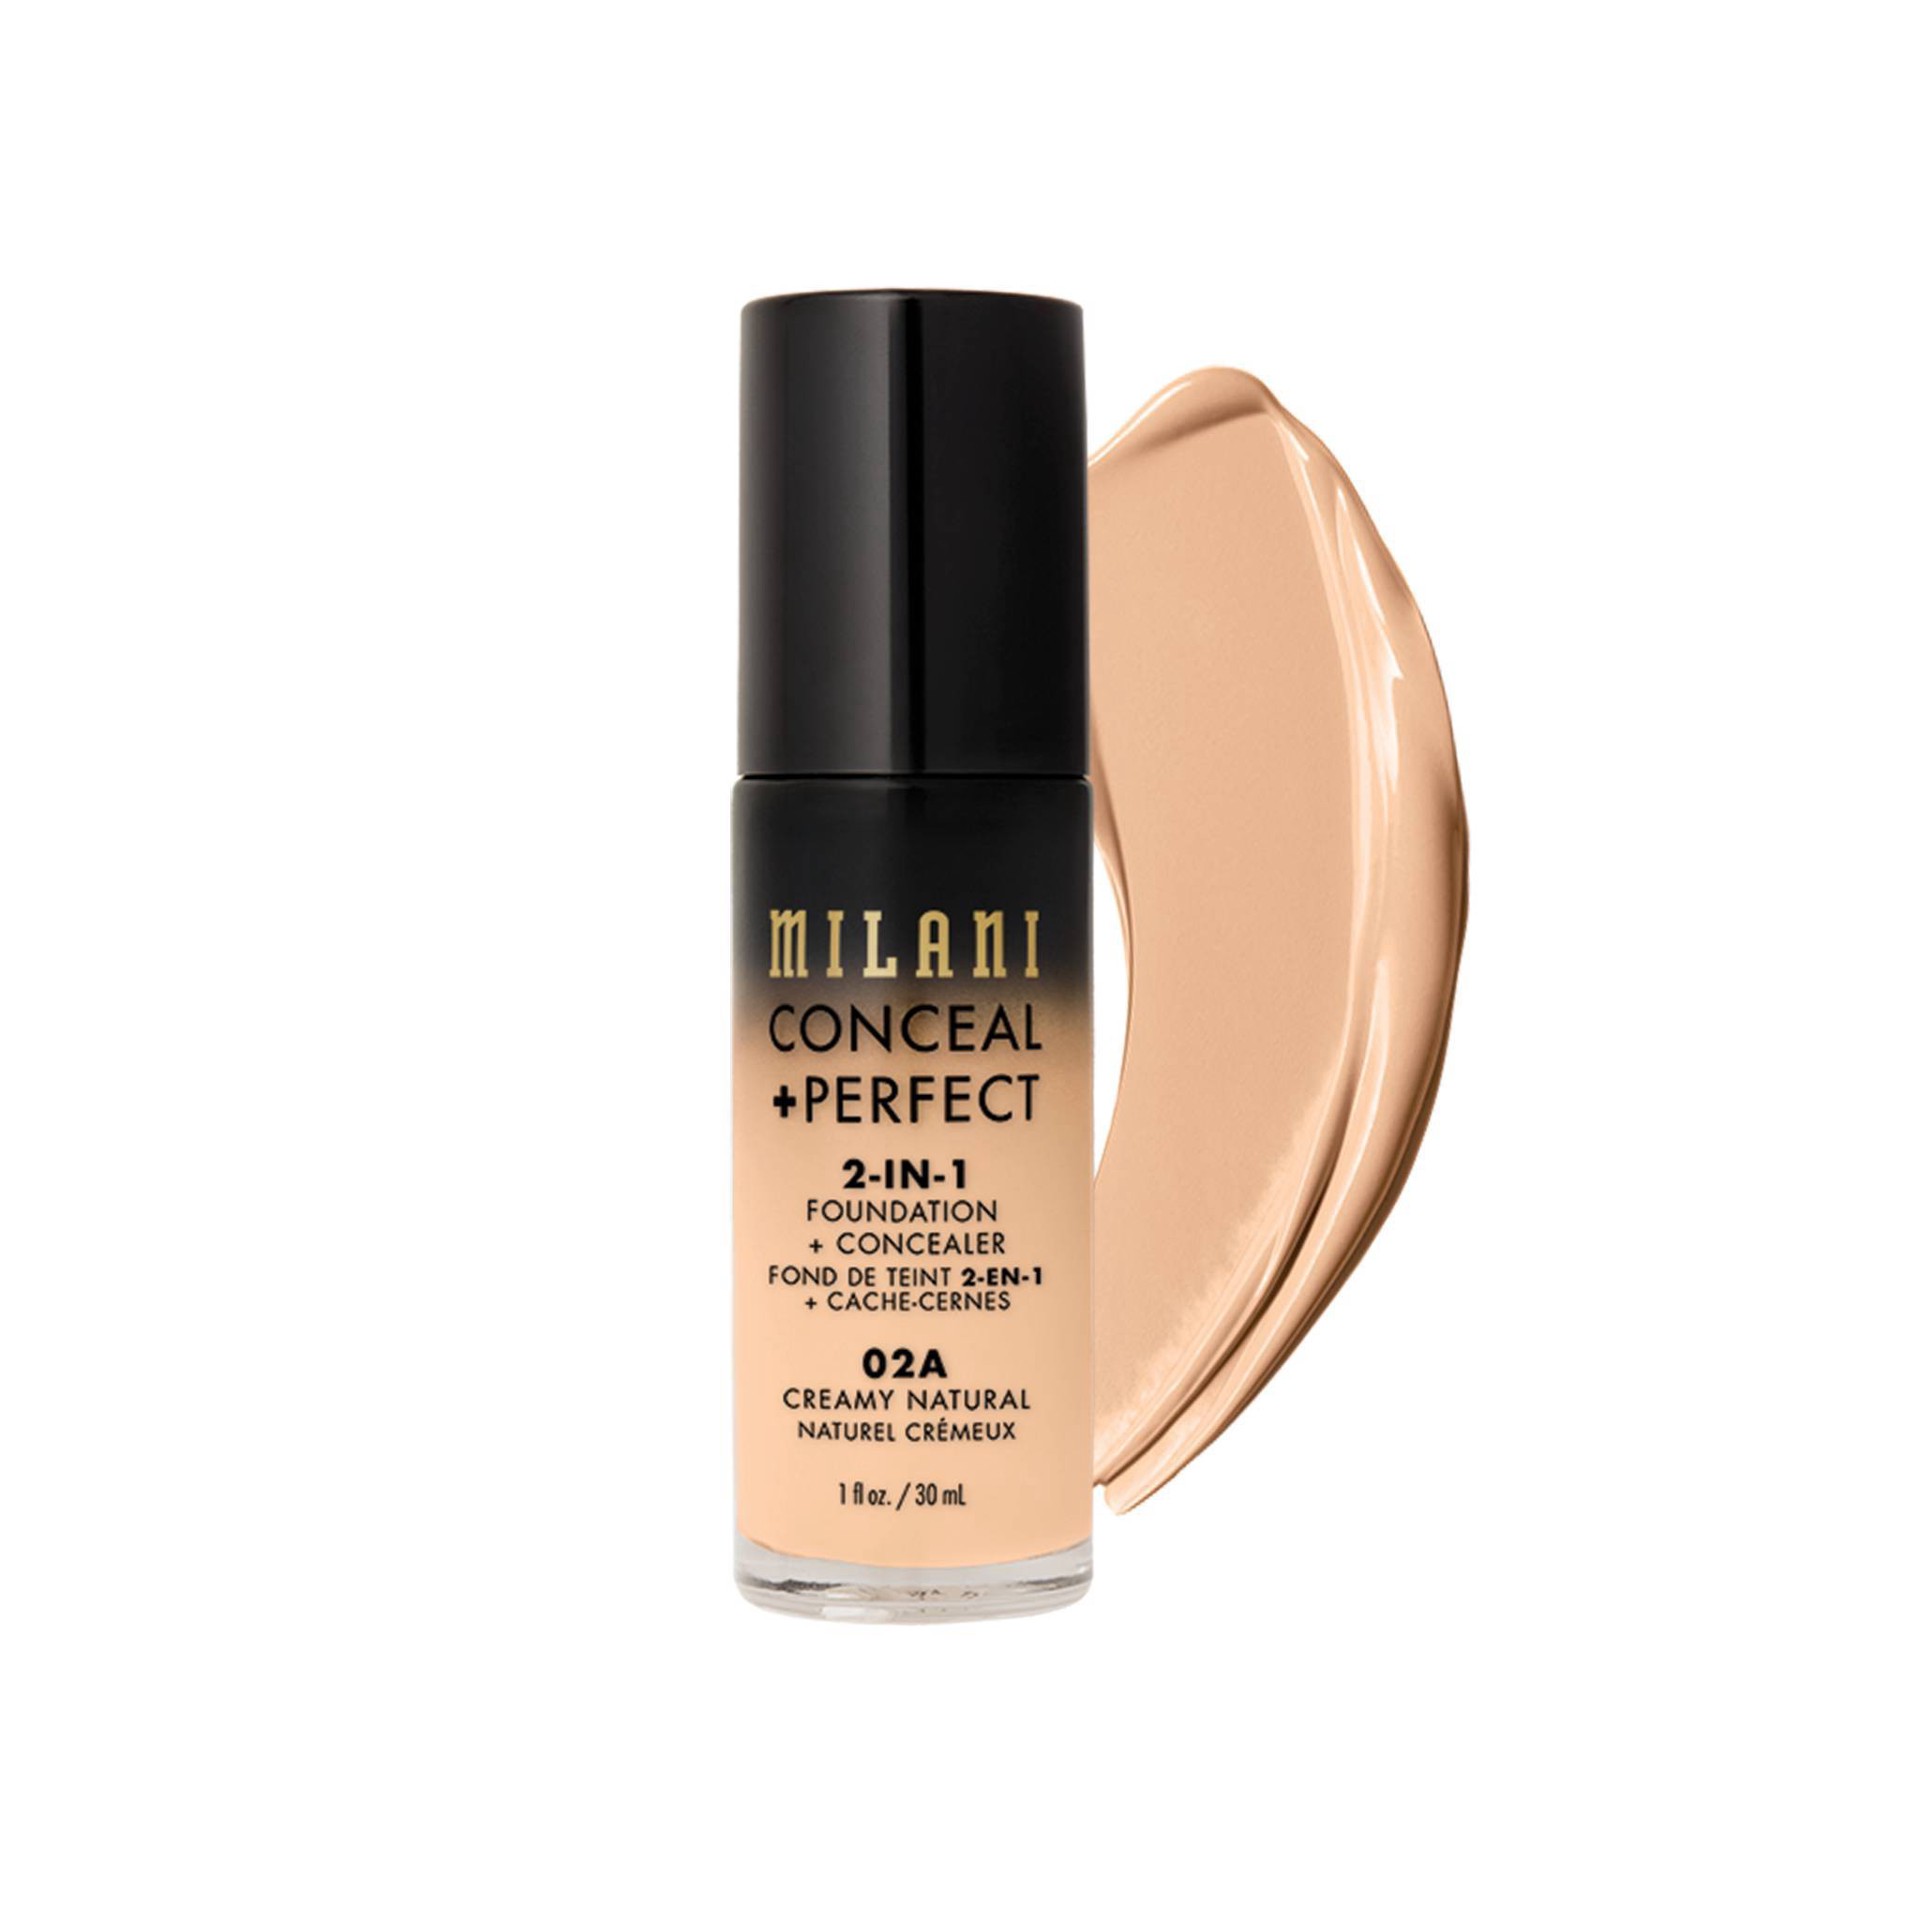 slide 1 of 2, Milani Conceal Perfect 2-in-1 Foundationconcealer 02a Creamy Natural, 1 fl oz